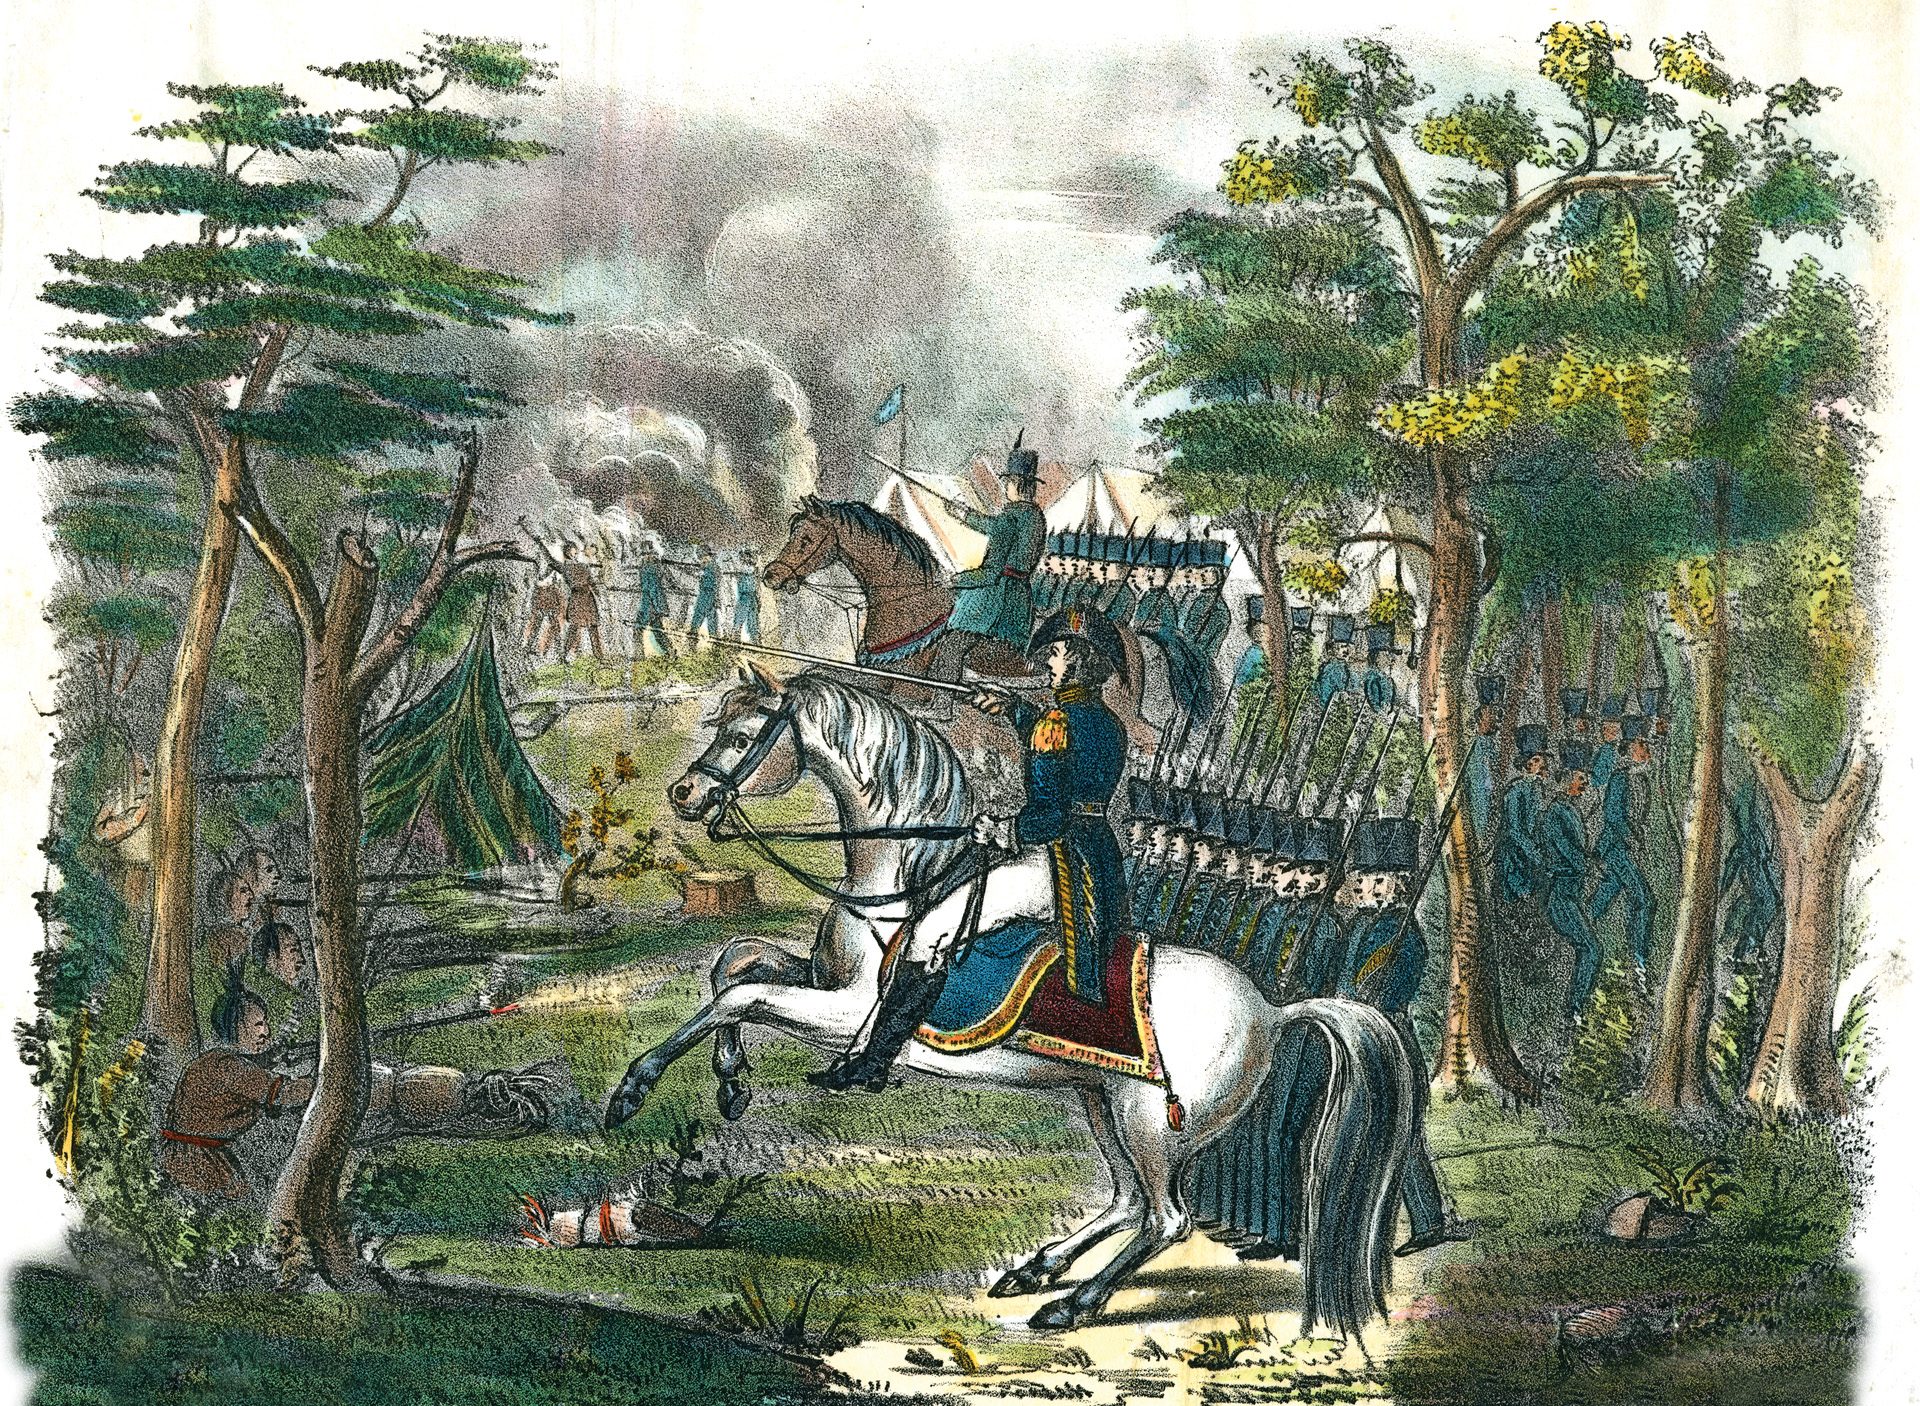 A period illustration inaccurately shows neatly aligned ranks of American soldiers. In reality, the Native Americans overran multiple sectors of St. Clair's perimeter, forcing him to retreat with his survivors. 